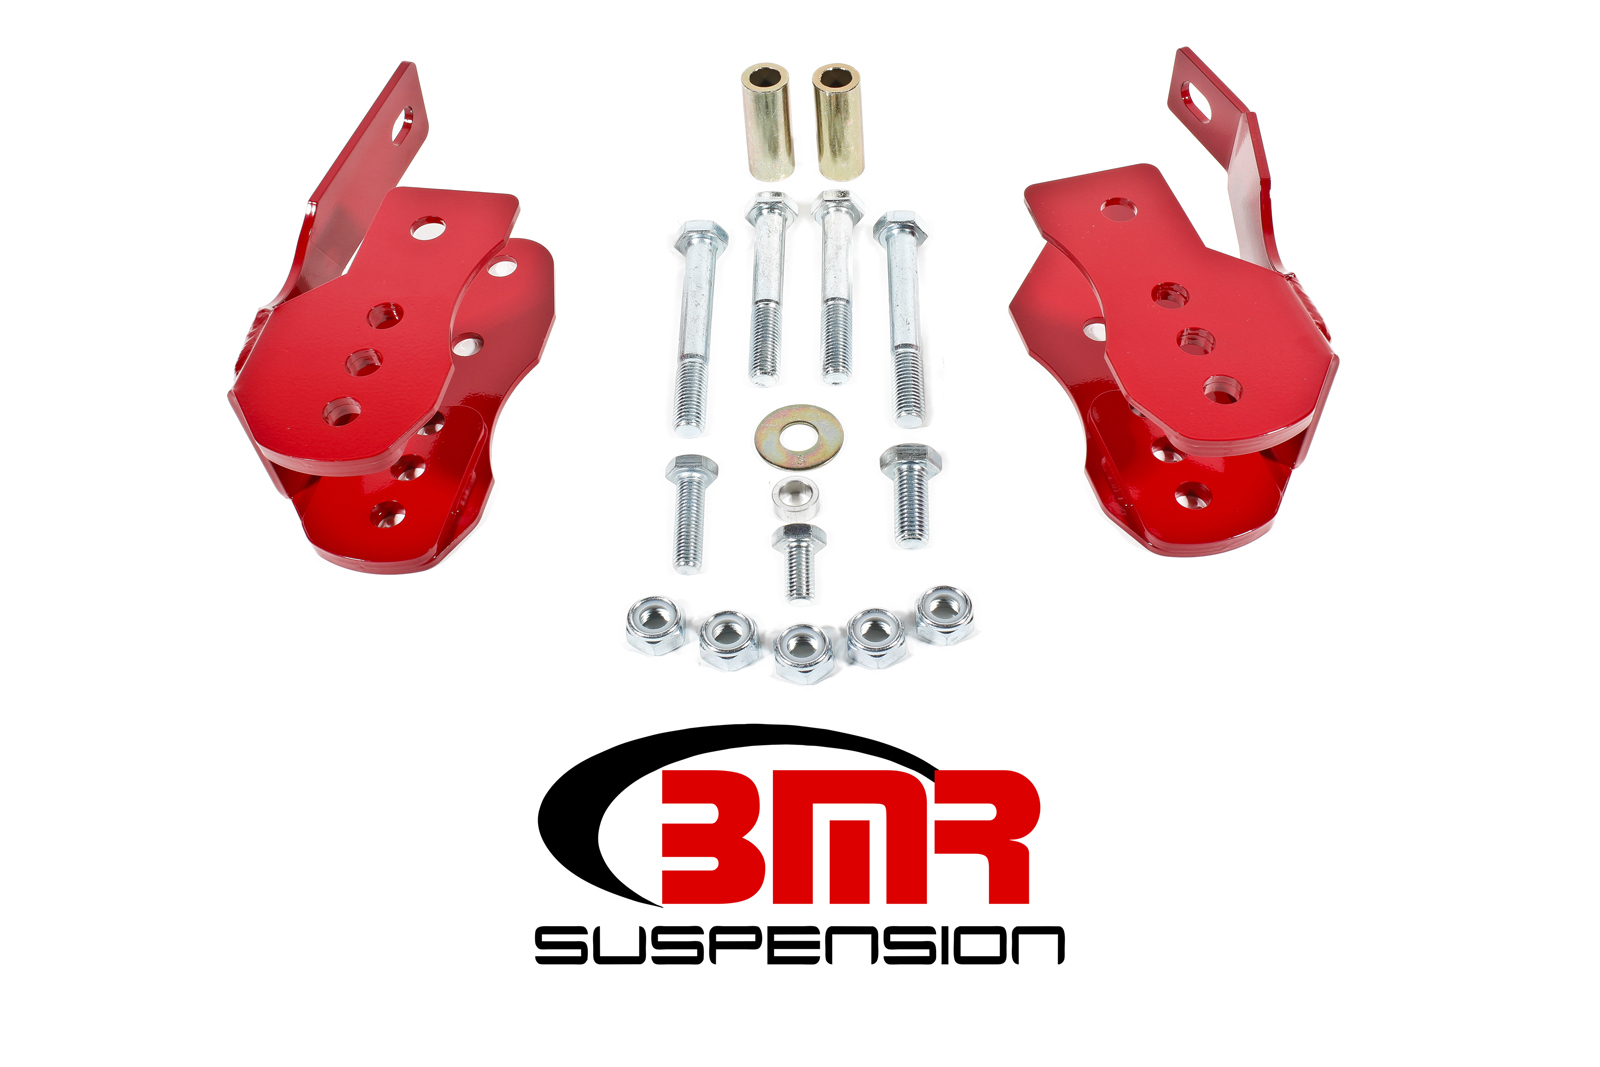 BMR Suspension Control Arm Bracket, Relocation, Lower, Bolt-On, Steel, Red Powder Coat, Ford Mustang 2005-14, Kit